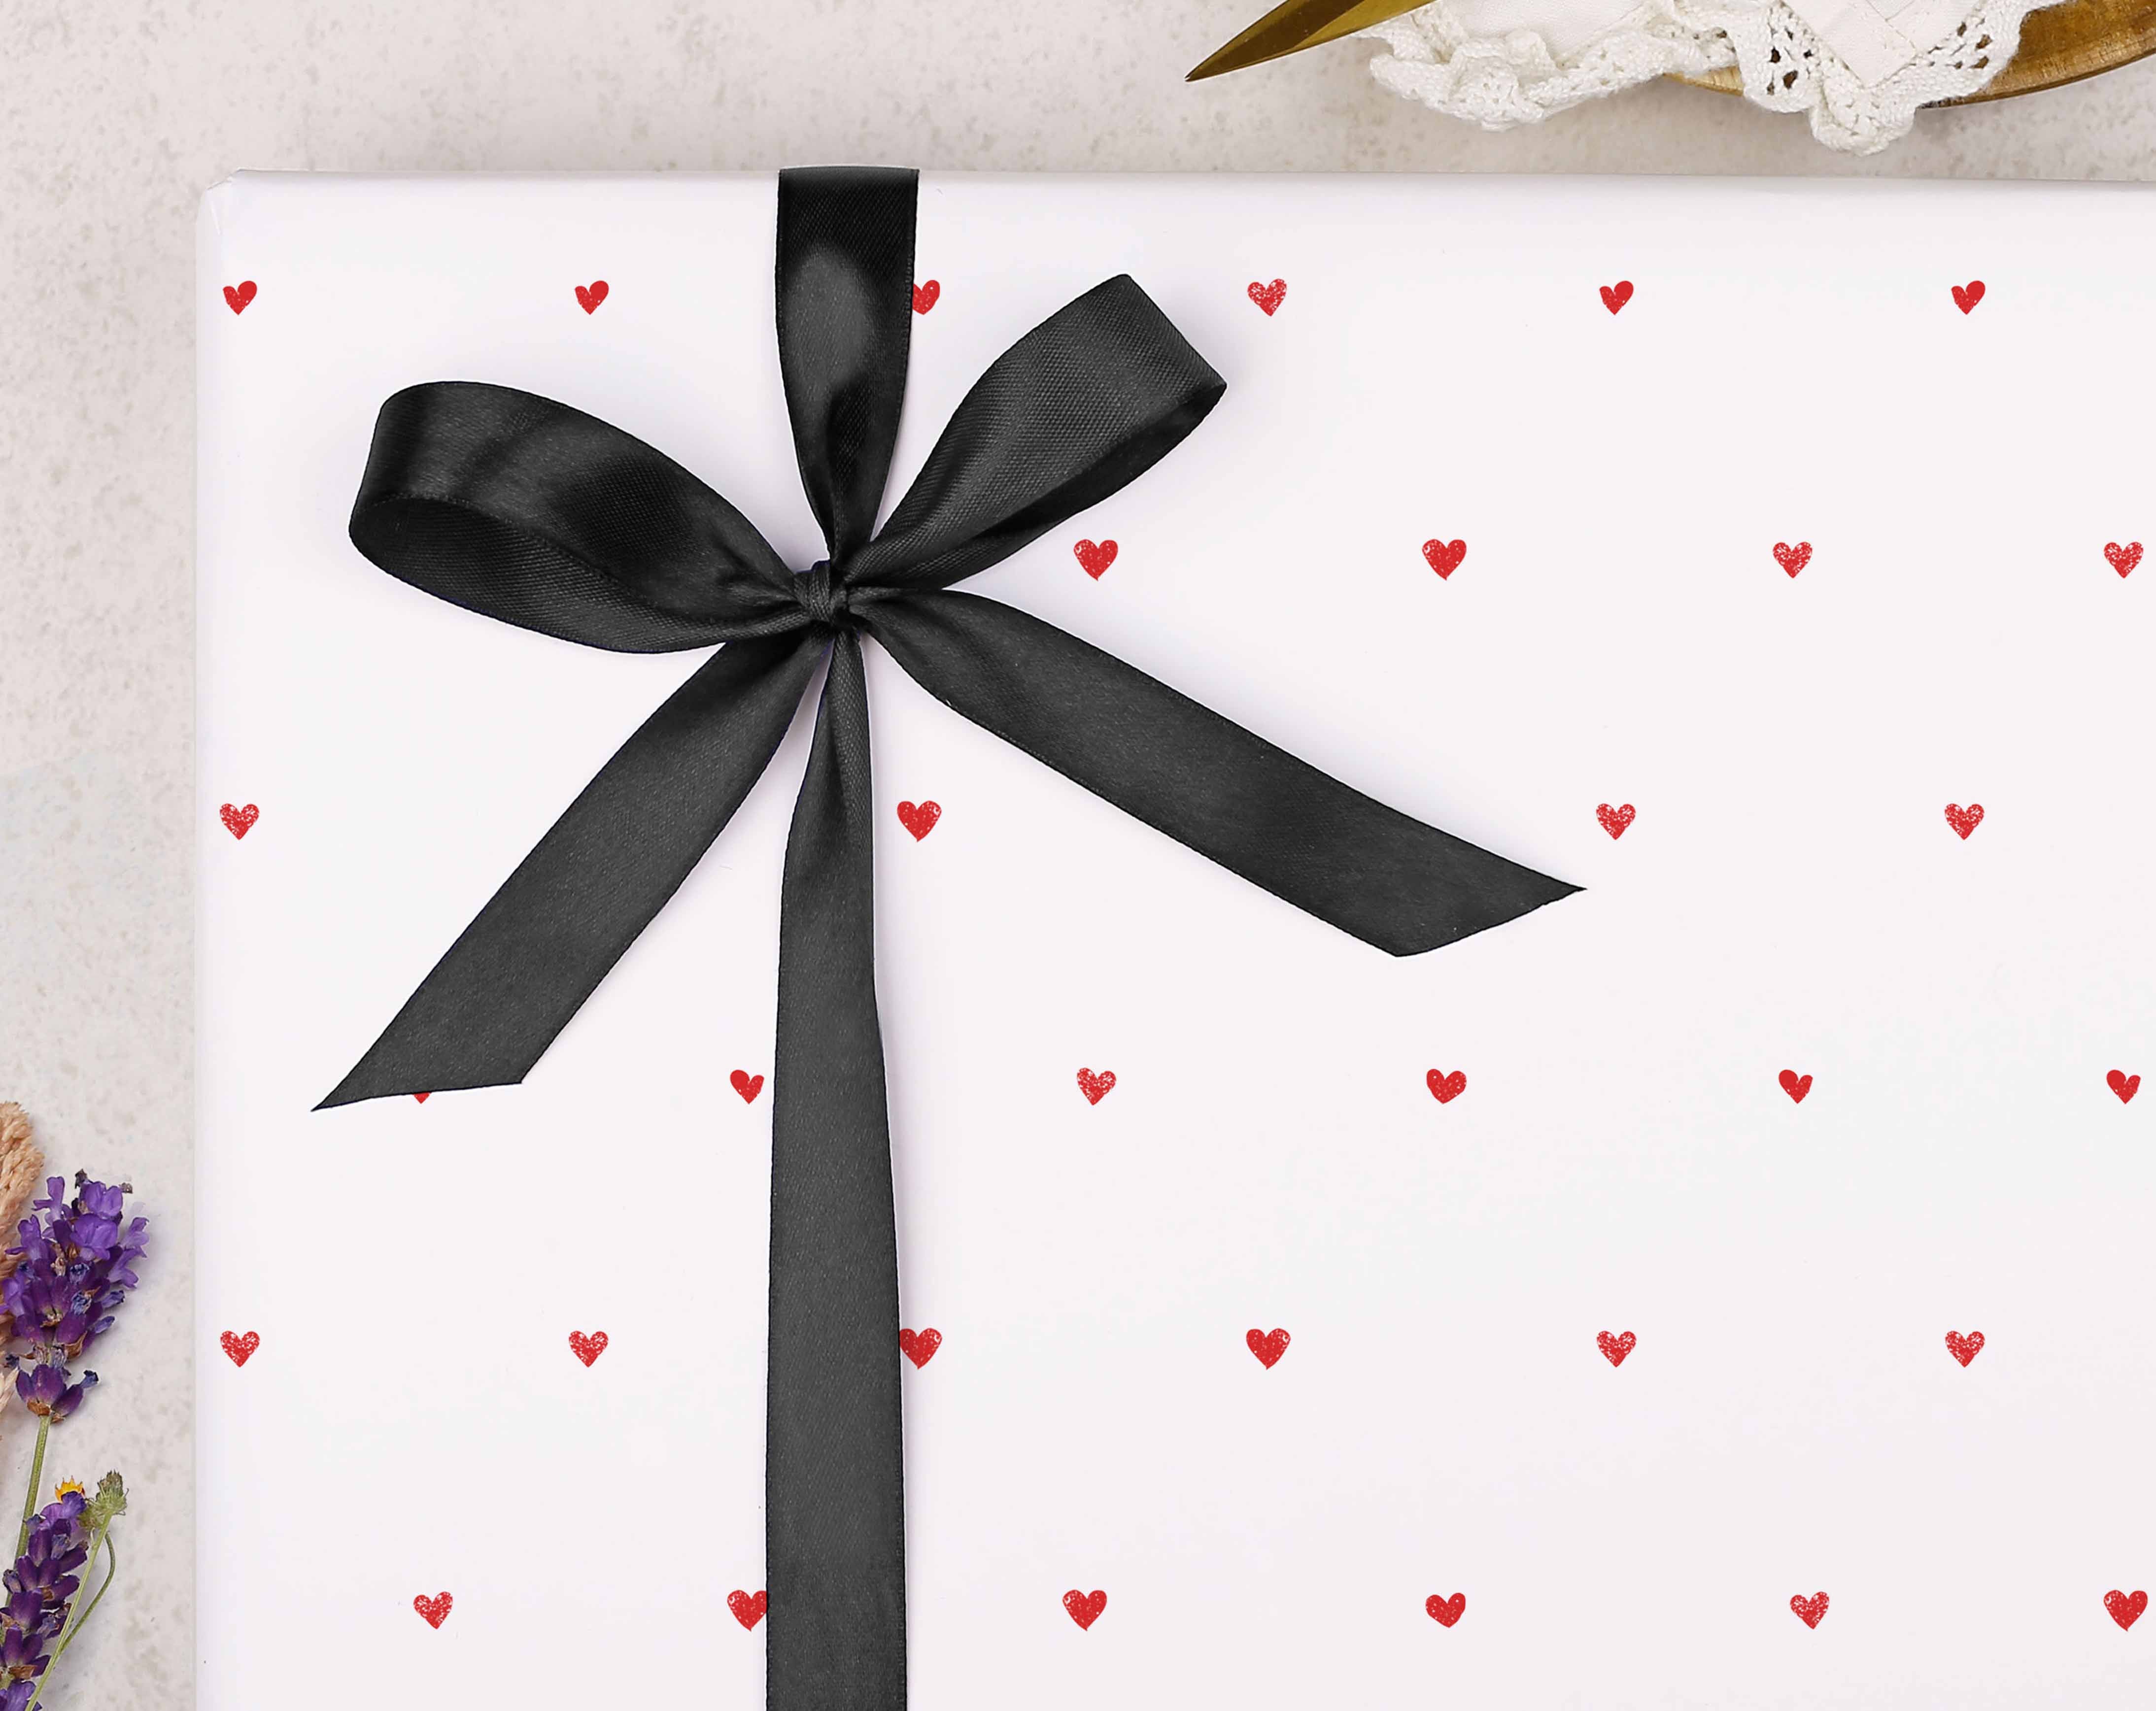 Red Heart Valentine Wrapping Paper